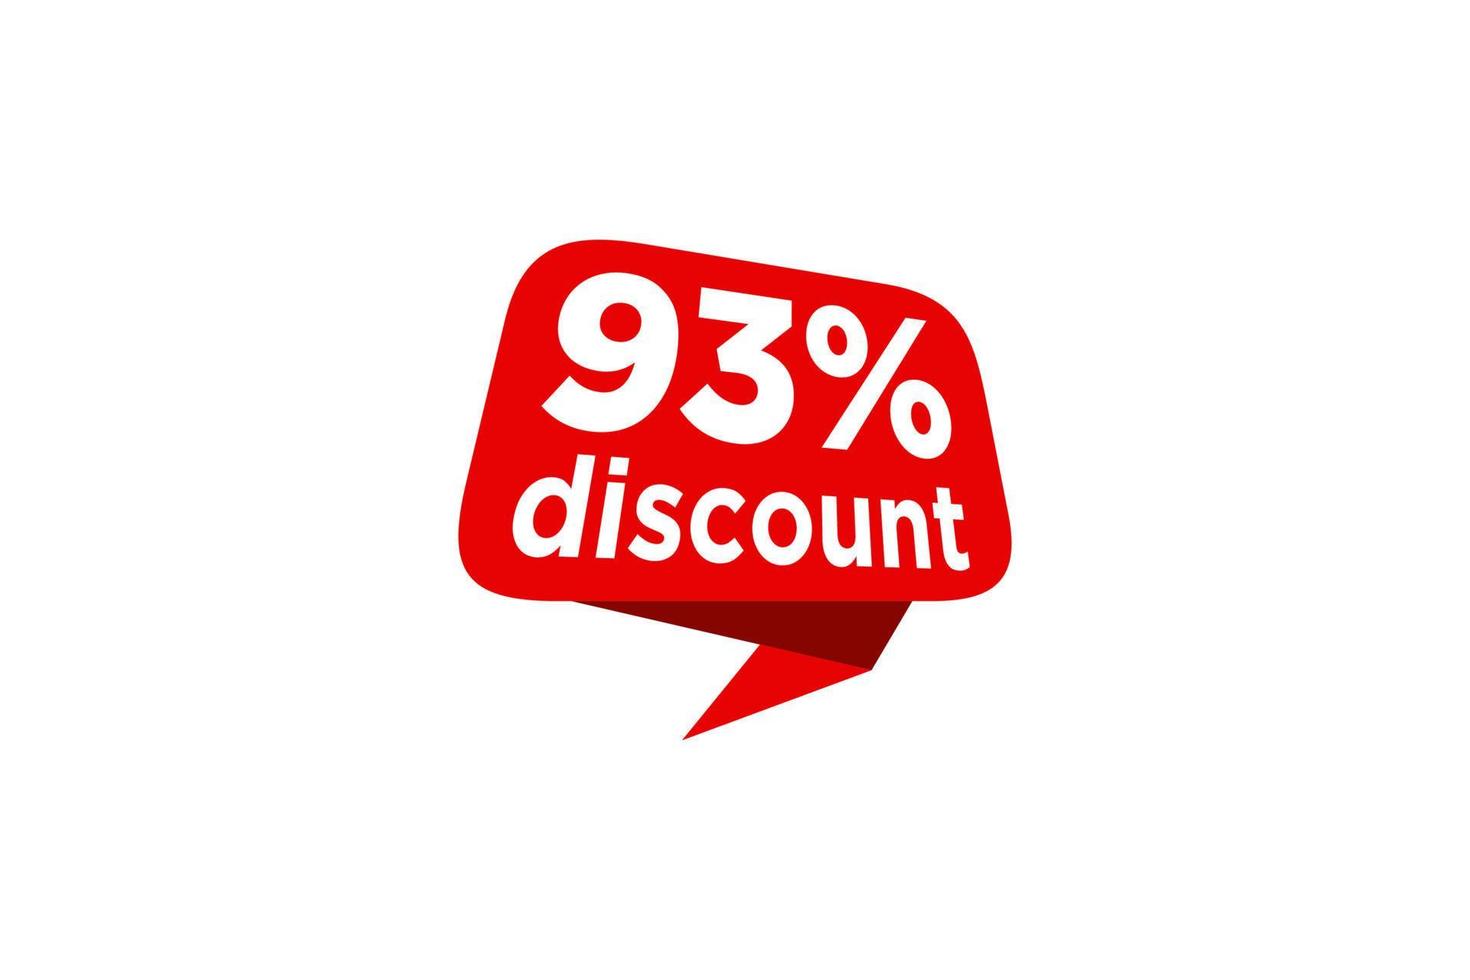 93 discount, Sales Vector badges for Labels, , Stickers, Banners, Tags, Web Stickers, New offer. Discount origami sign banner.